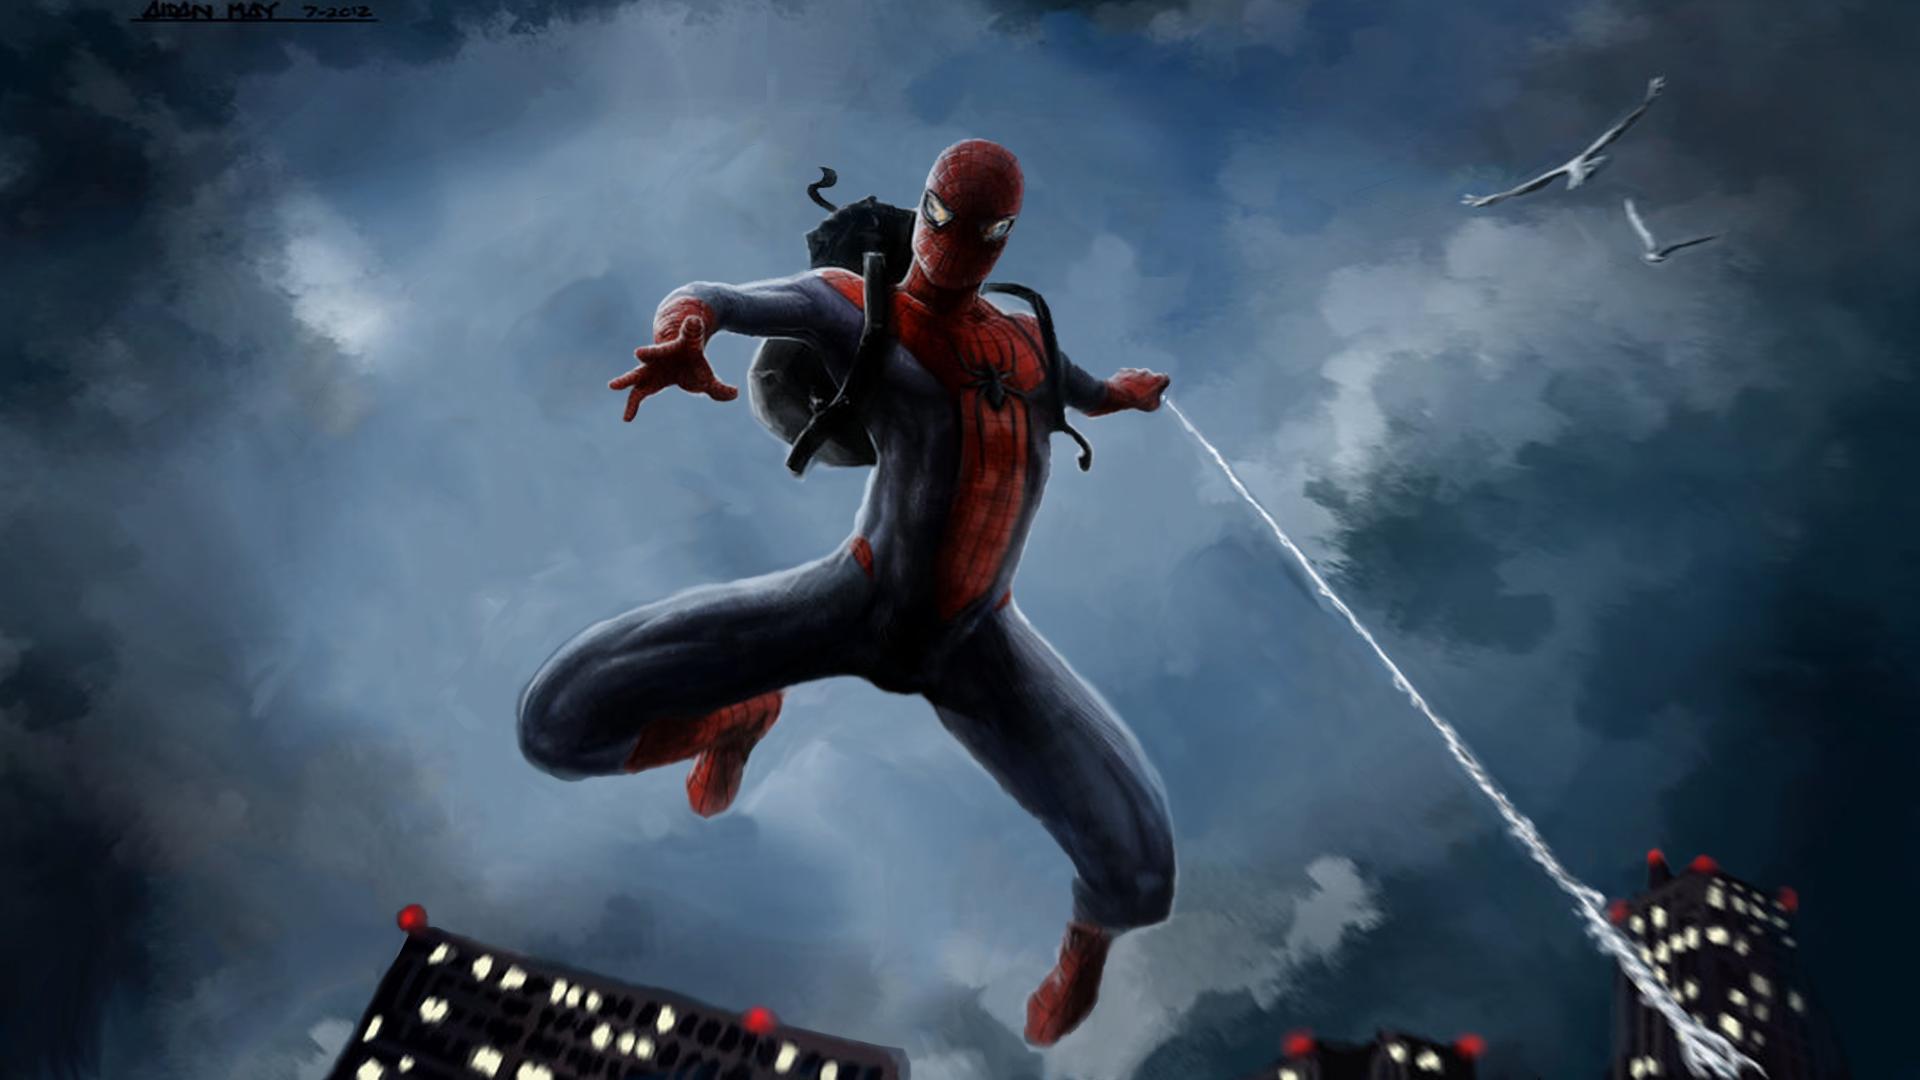 Games SpiderMan Wallpapers SpiderMan Backgrounds 1080x1920px 1920x1080